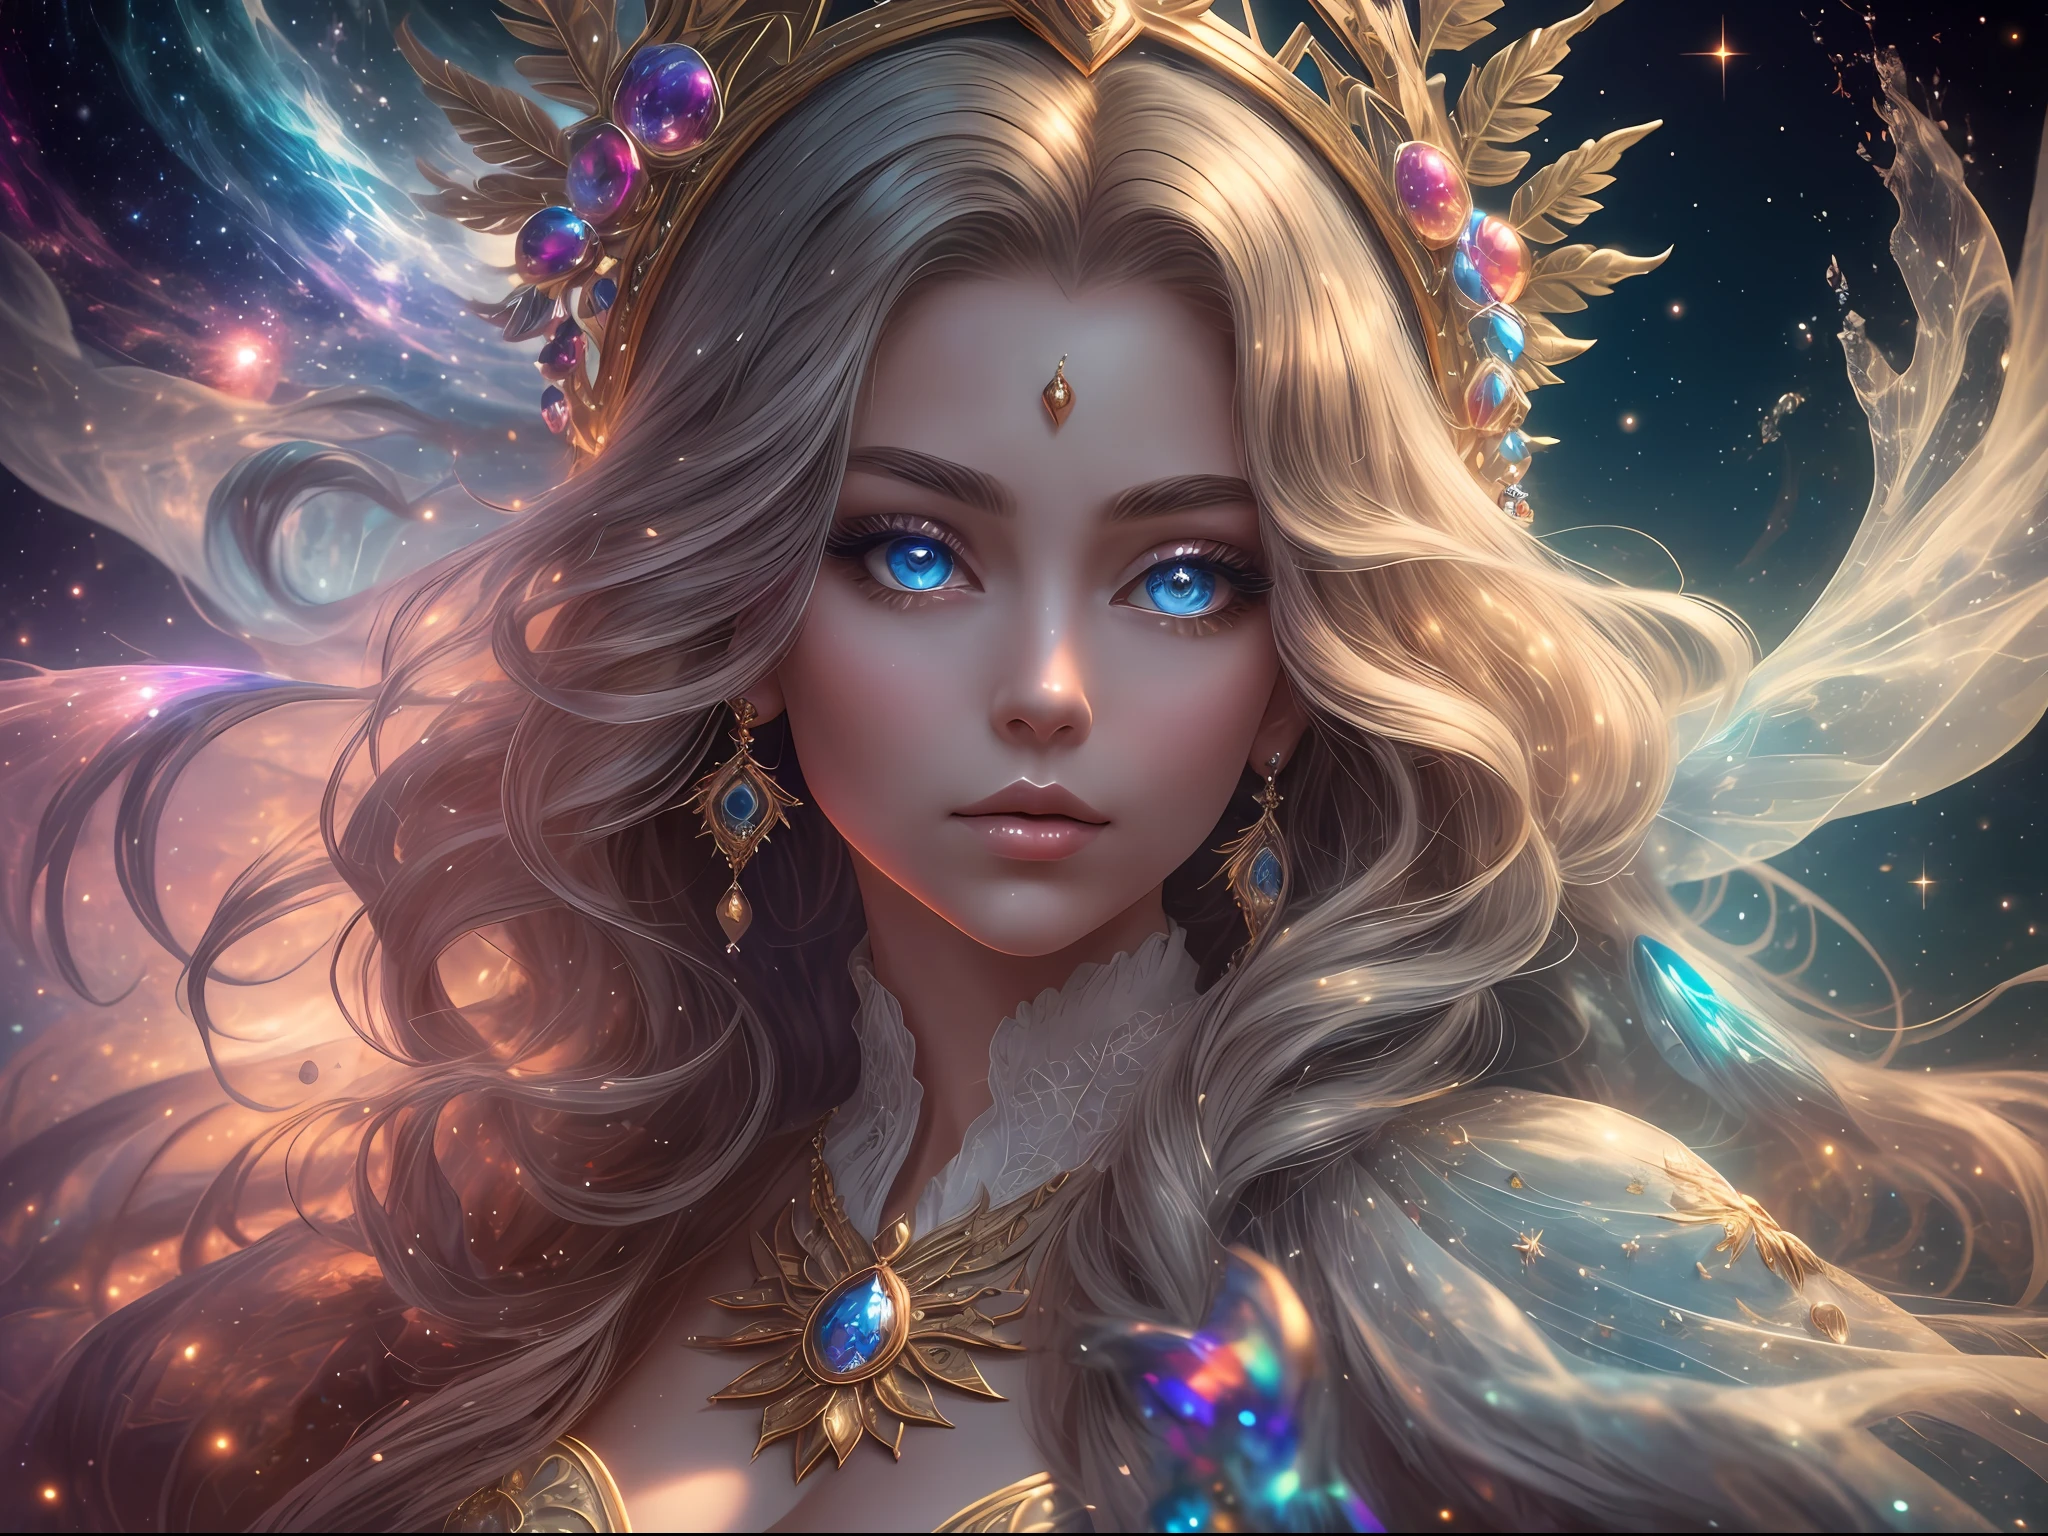 In the style of colorful mythic fantasy. Generate a celestial queen with long, curly hair. The queen has a beautifully detailed face with small, realistic details and naturally shaded eyes. Her lips are full and her mouth is wide, and her eyes are big, ultra-detailed, highly defined, and hires. Her face should be mature and look (middle-aged). Her clothing is silk, lace, and soft gossamer fur and feathers. Her clothing should be intricately detailed and delicately embroidered. Include a highly detailed celestial background. Include details with phantasmal iridescence, iridescence, bumps, and fantasy vibes. Light: Utilize innovative lighting techniques that enhance her eyes and enhance small details in the artwork. Camera: Utilize dynamic composition techniques to create an action-packed image that takes viewers on an adventure.